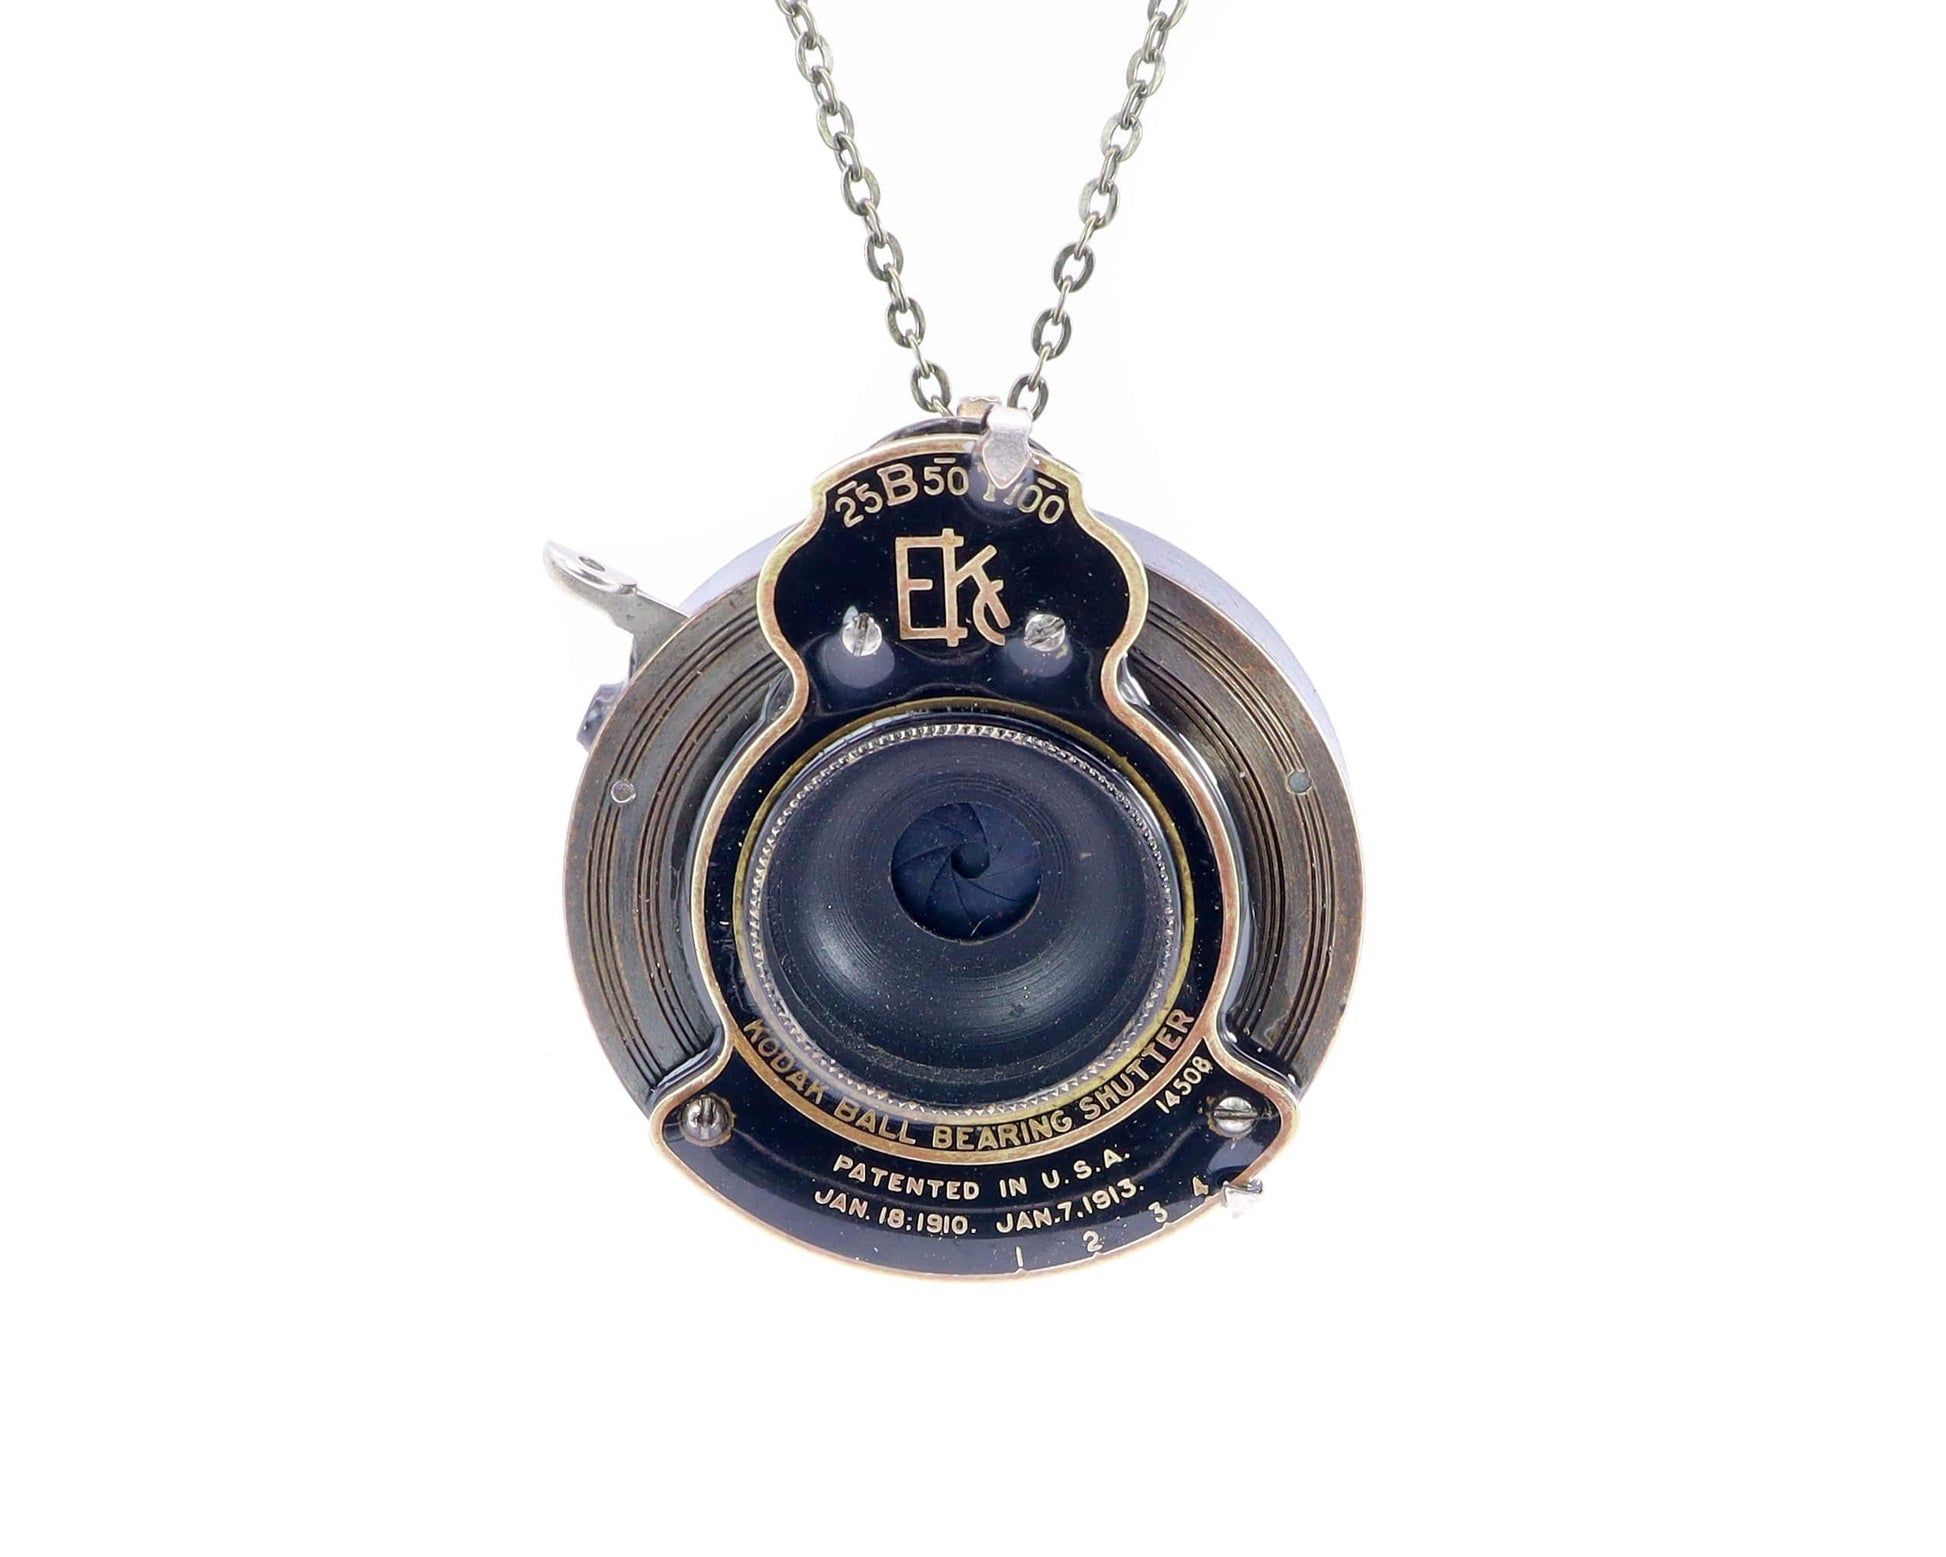 Vintage Medium Camera Lens Pendant Necklace, Gift for Wife, Eco-Friendly Upcycled Statement Jewelry for Her, Handmade Steampunk Jewelry Style 1